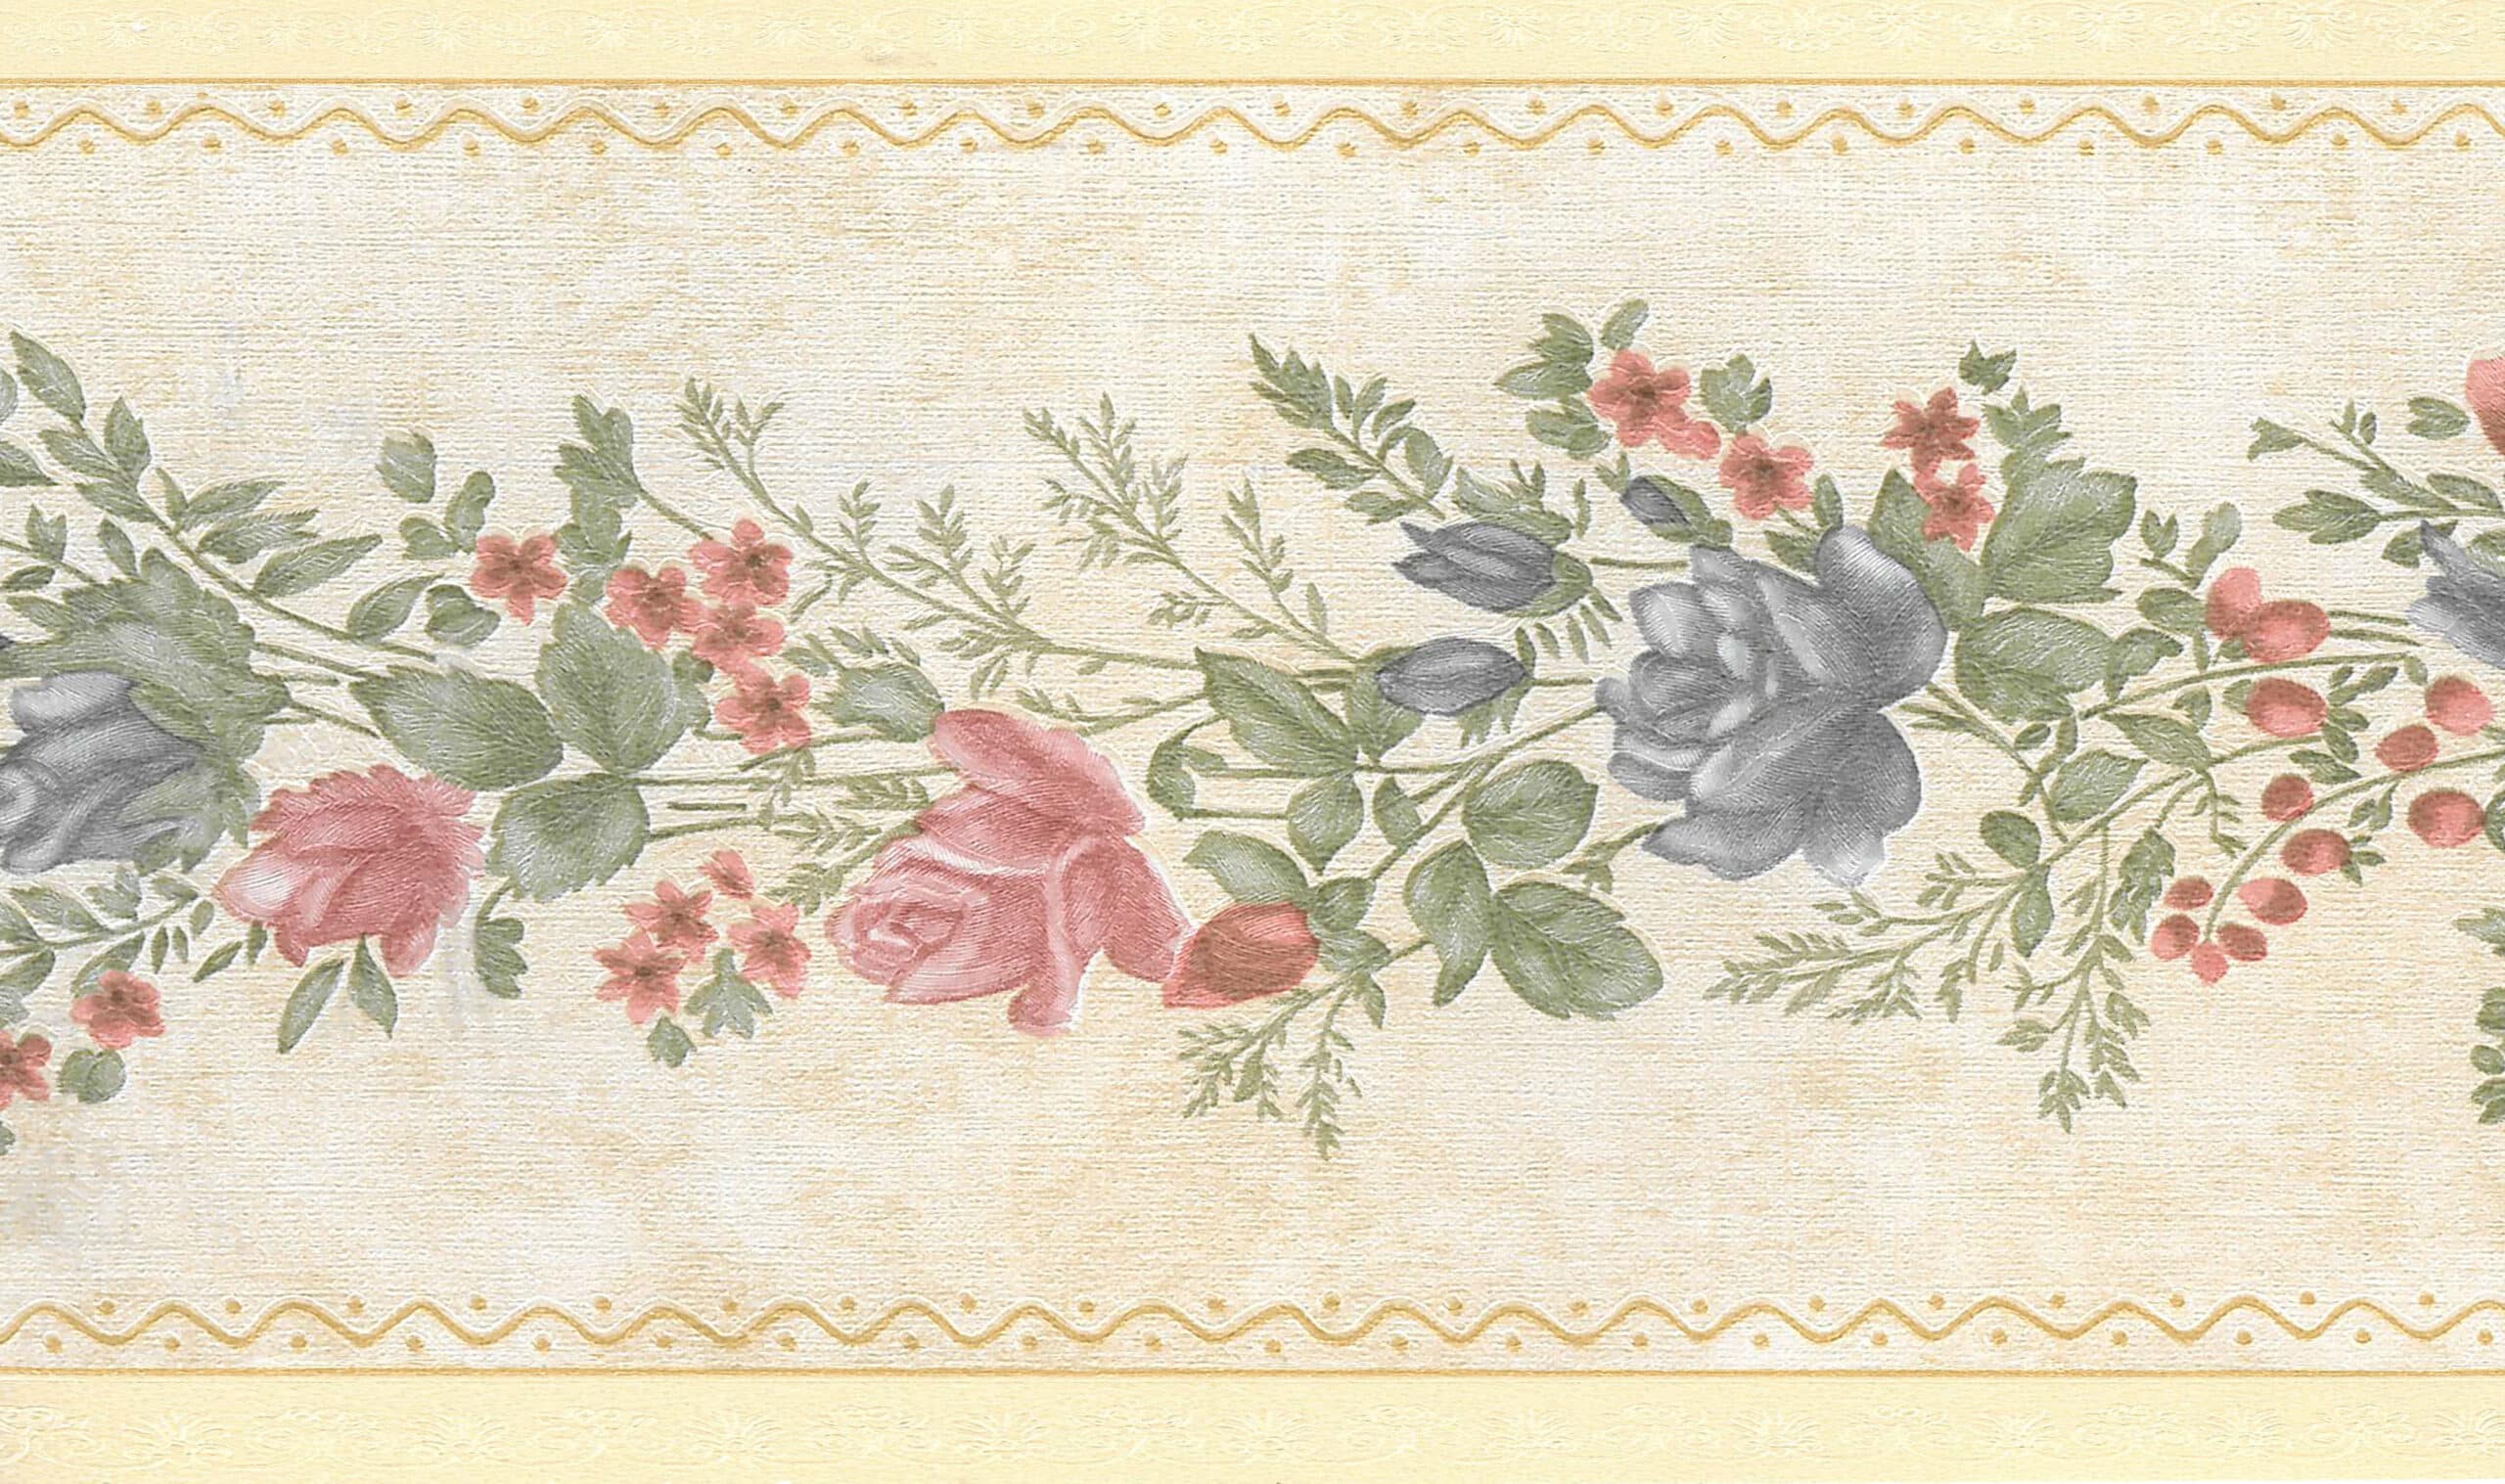 Floral Pink, Red, Blue Blooming Roses on Vine Wall Border Retro